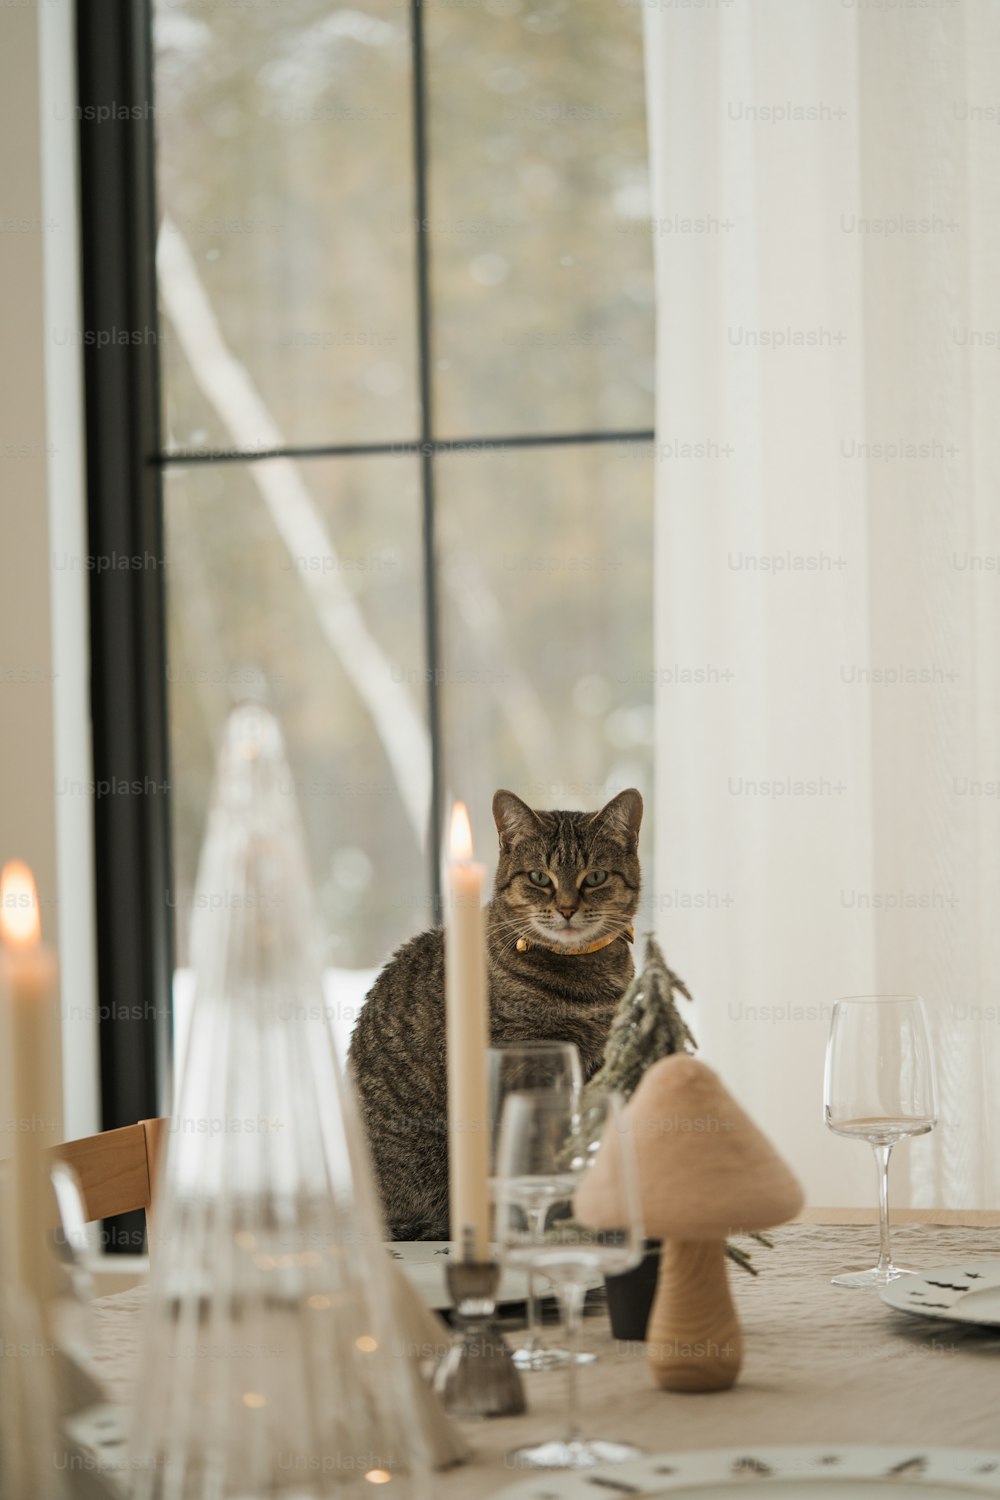 a cat is sitting on a table with a candle